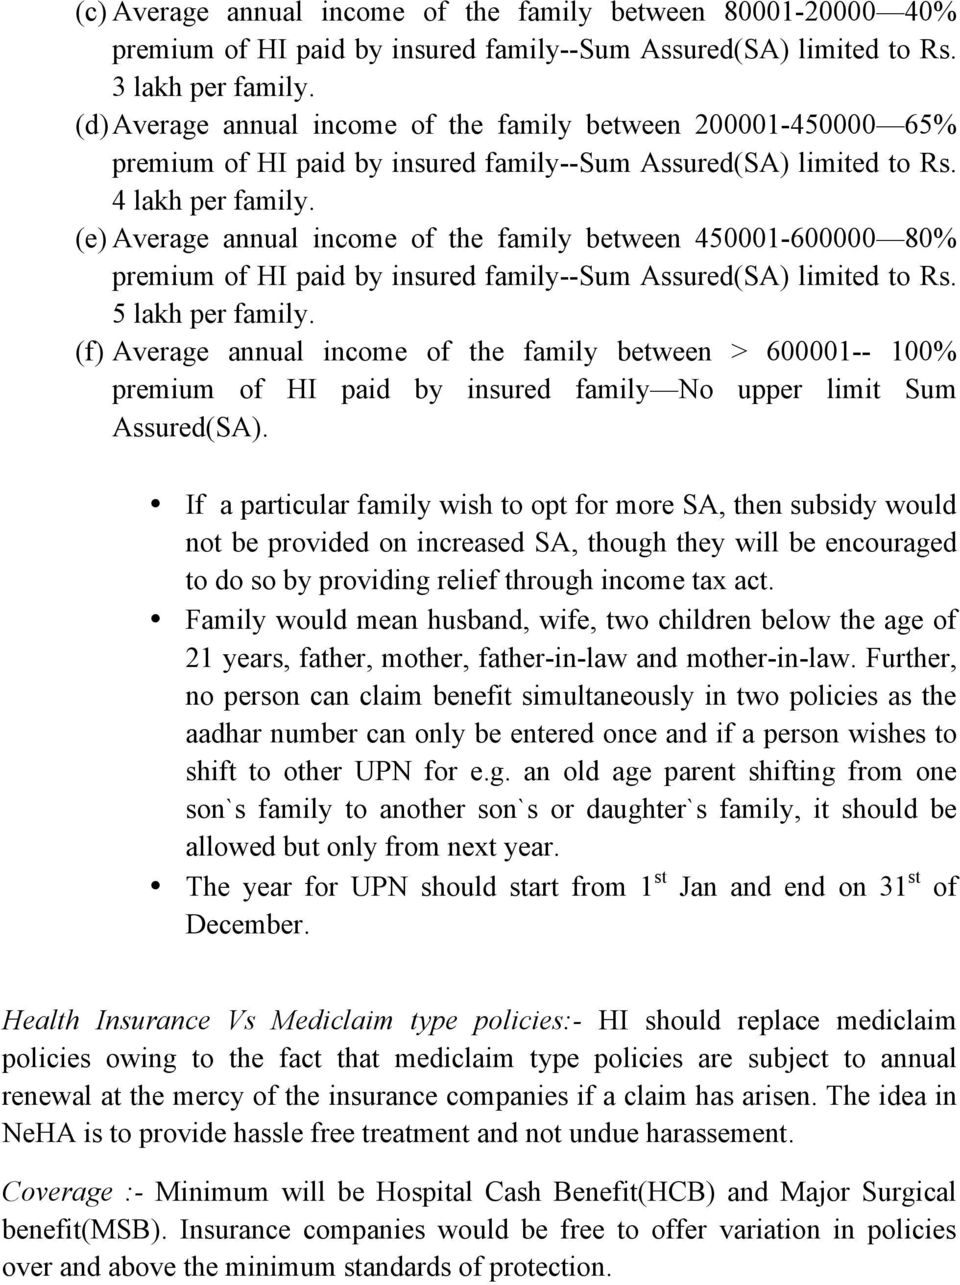 (e) Average annual income of the family between 450001-600000 80% premium of HI paid by insured family--sum Assured(SA) limited to Rs. 5 lakh per family.